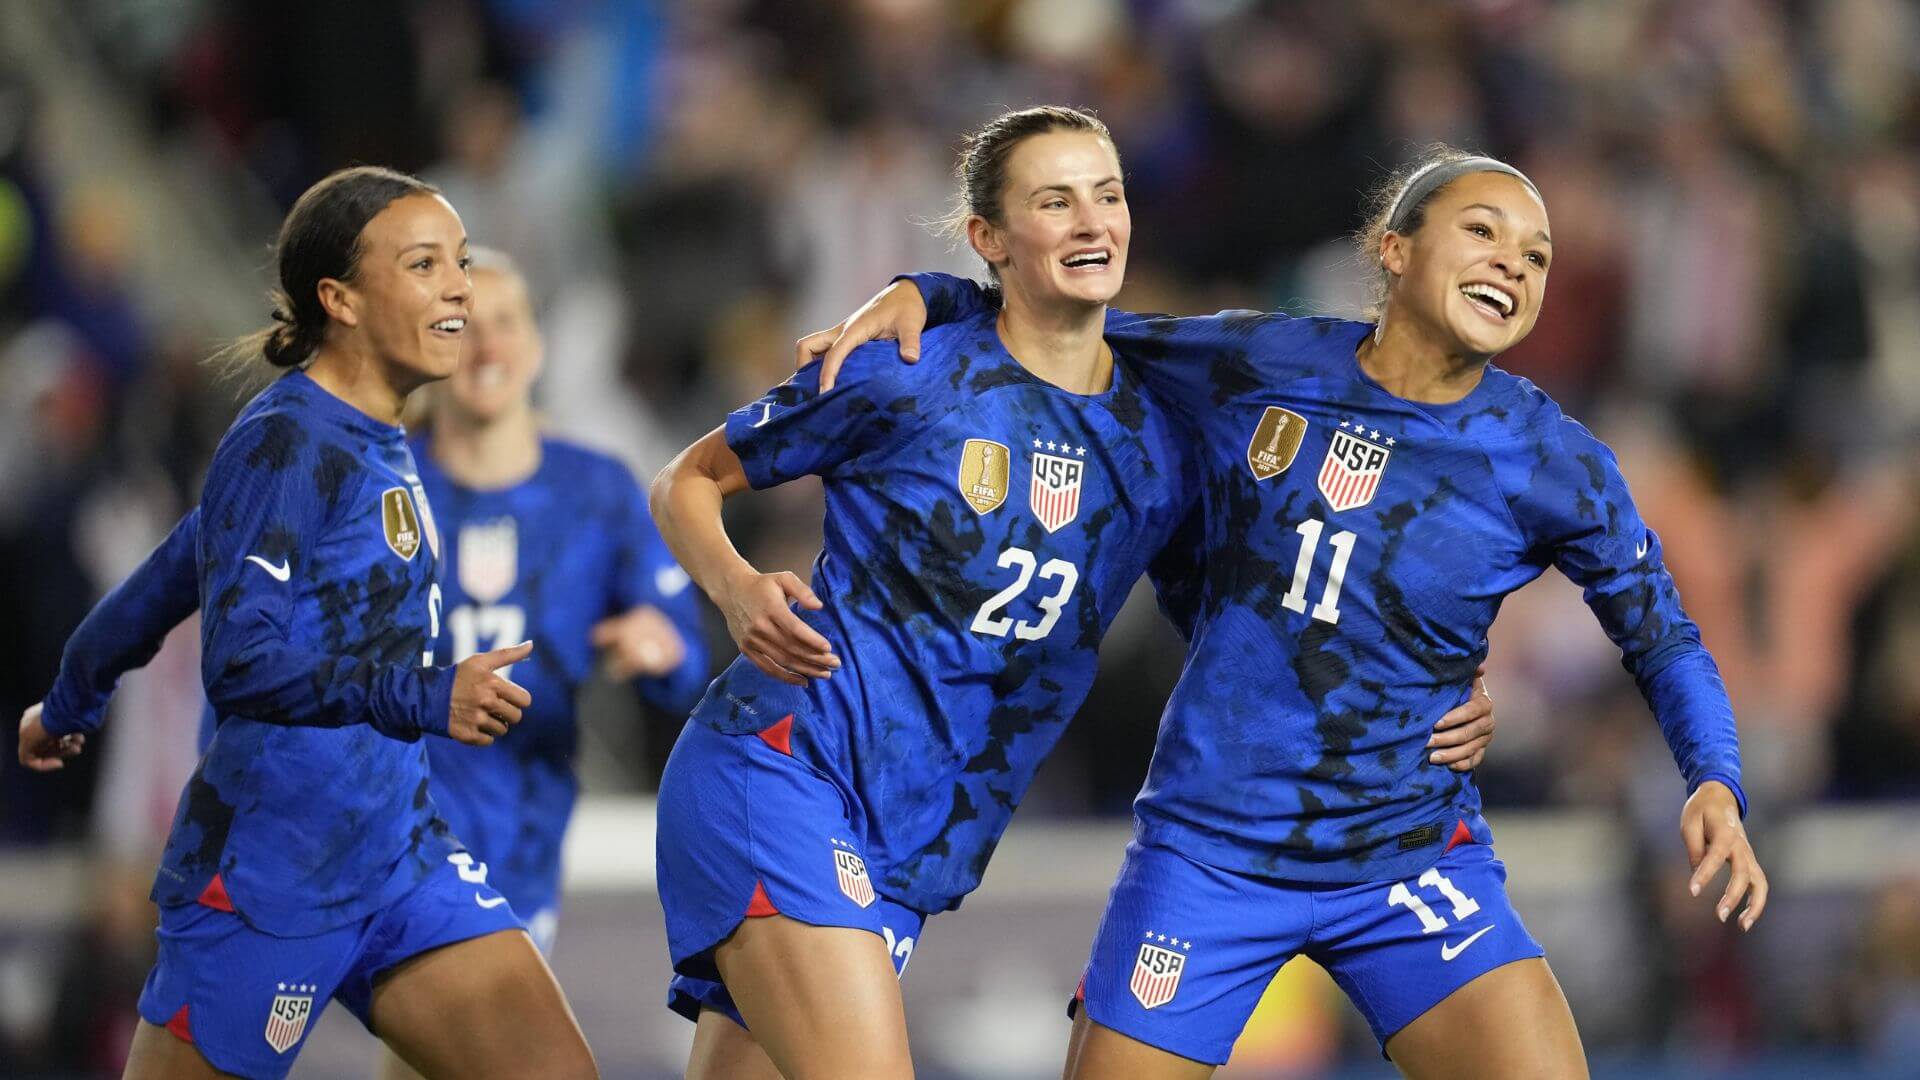 In women's soccer news, the USWNT Best Player's were nominated